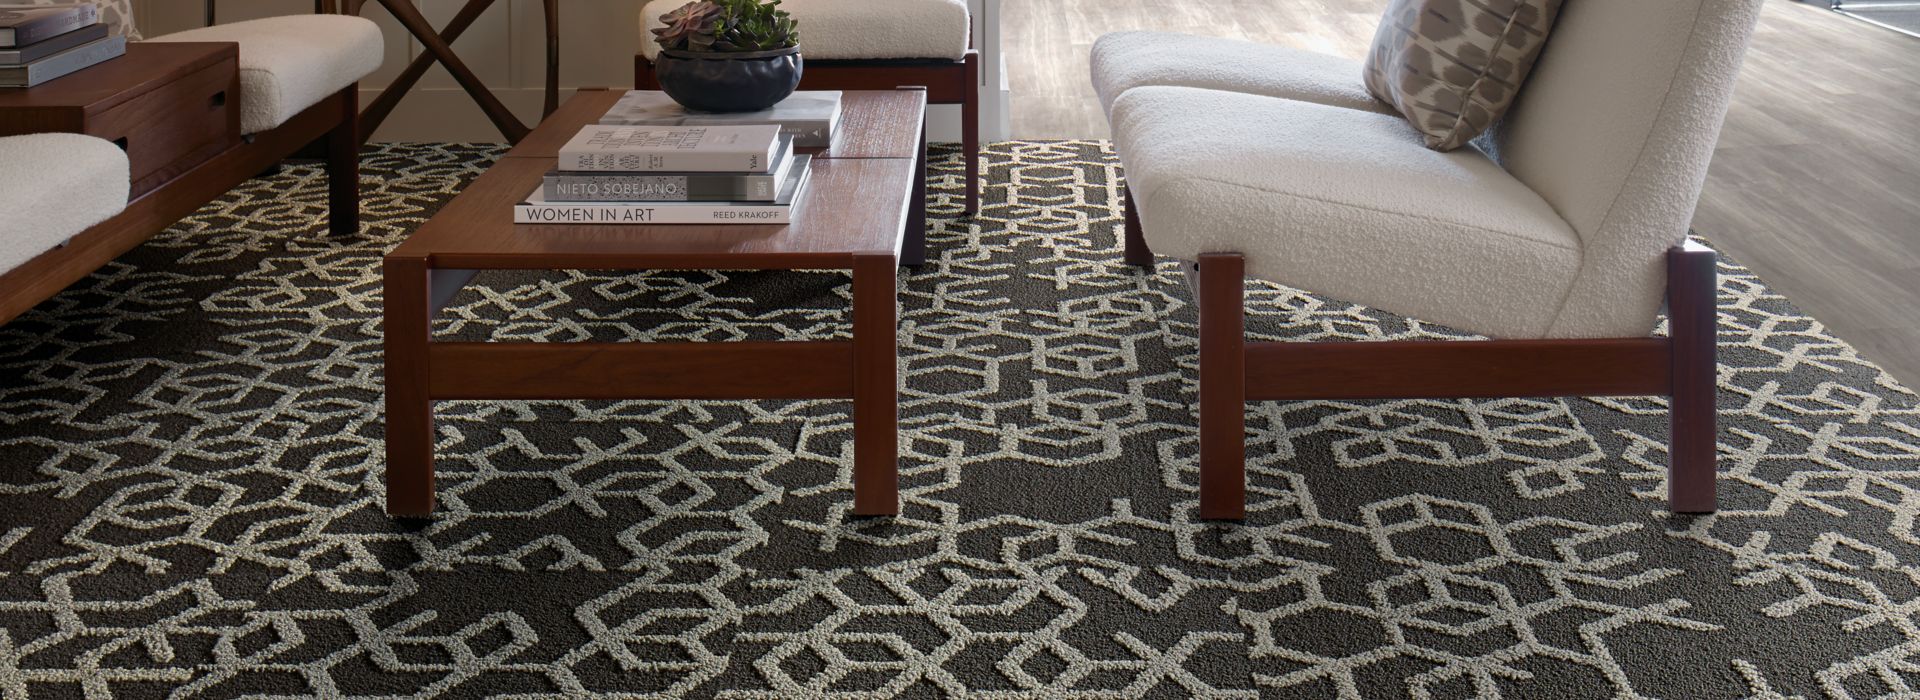 Interface Bee's Knees carpet tile and LVT in seating area image number 1